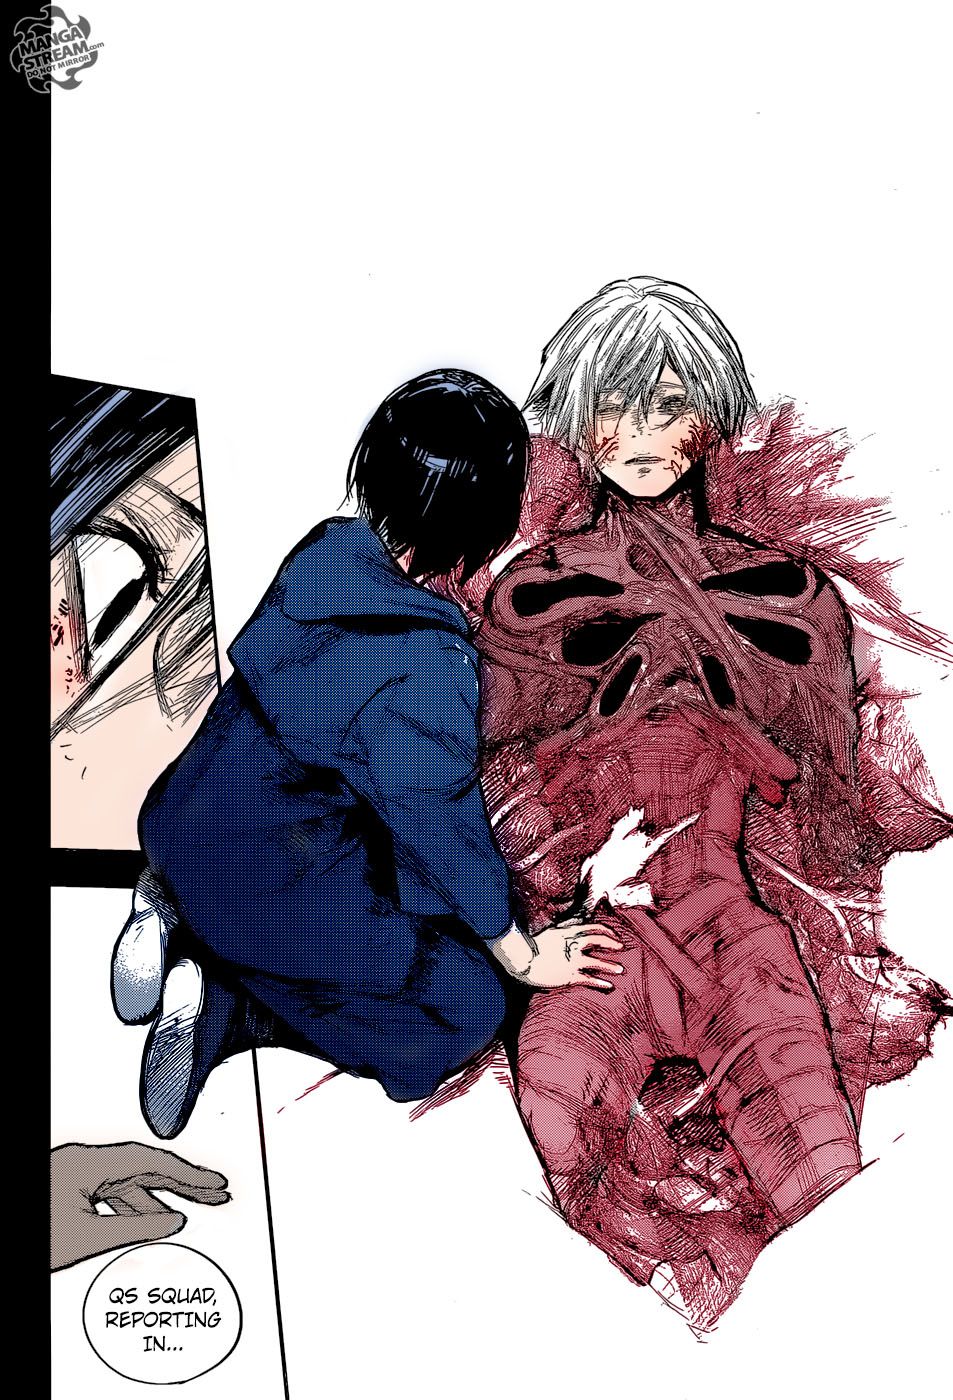 Tokyo Ghoul RE: Chapter 161 Colored